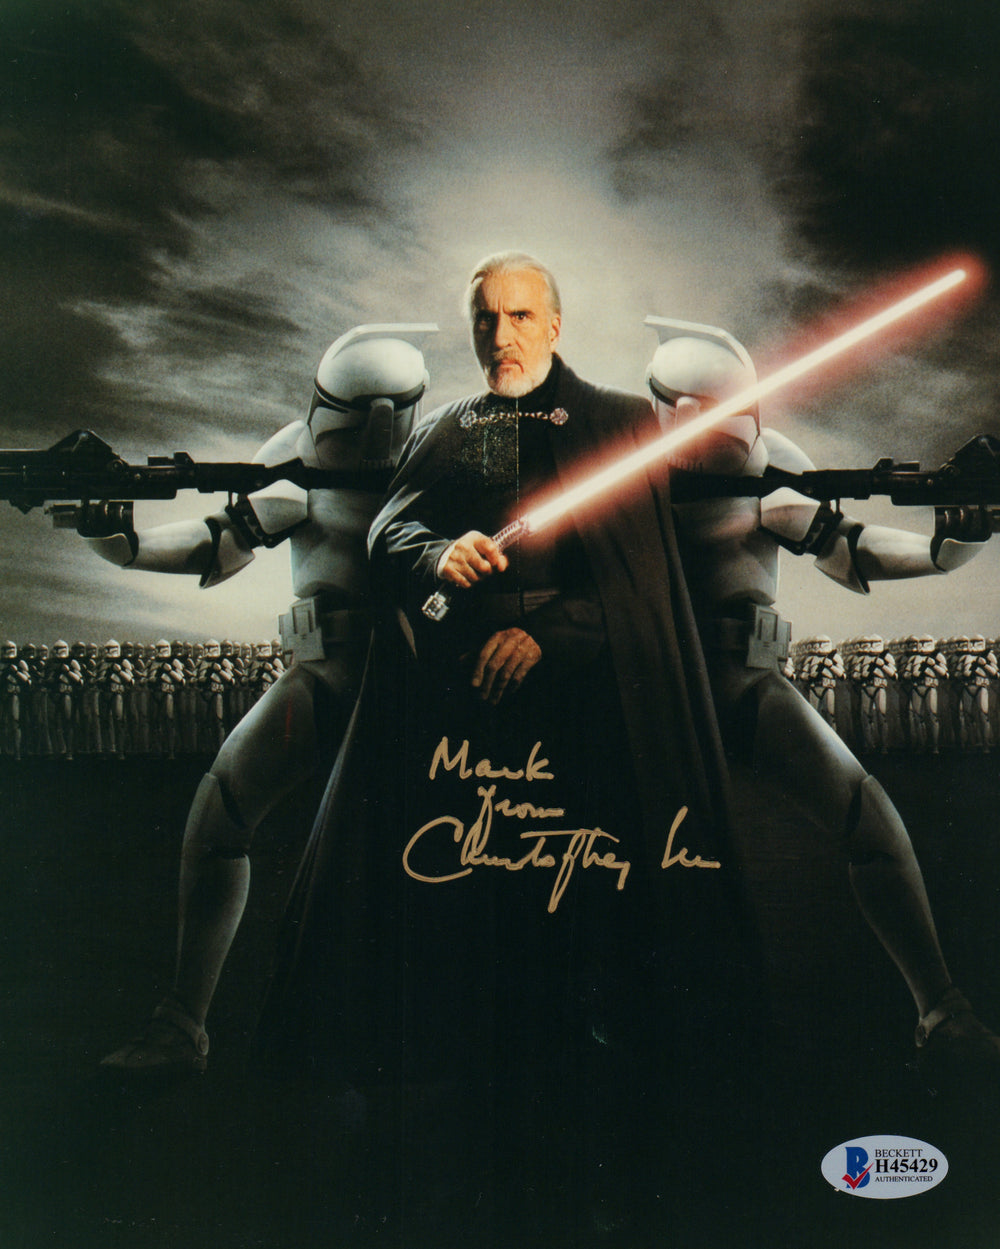 Christopher Lee Count Dooku Star Wars Episode II: Attack of the Clones Signed 8x10 Photo